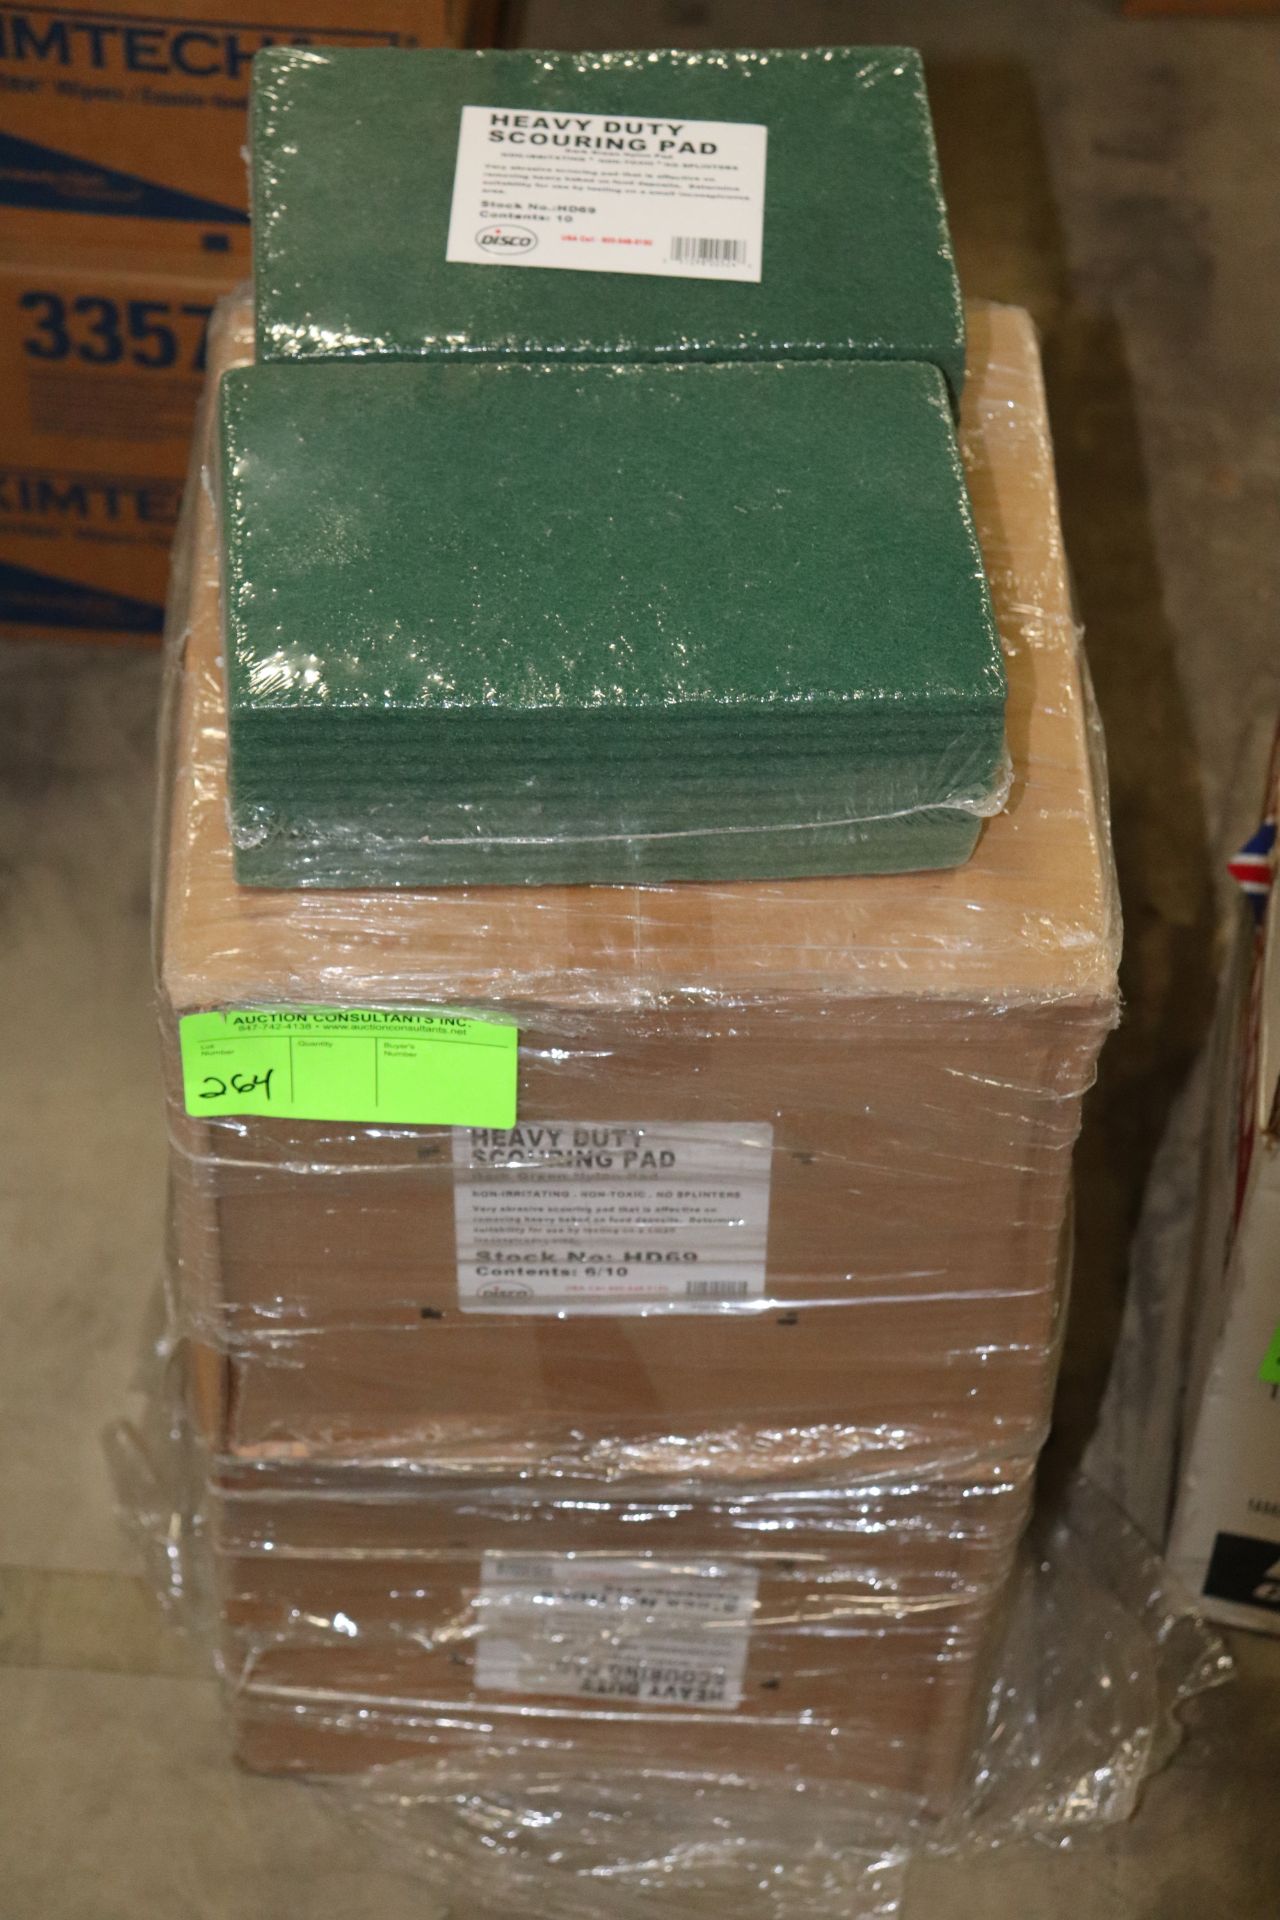 Two boxes of heavy duty scouring pads, 60 per box